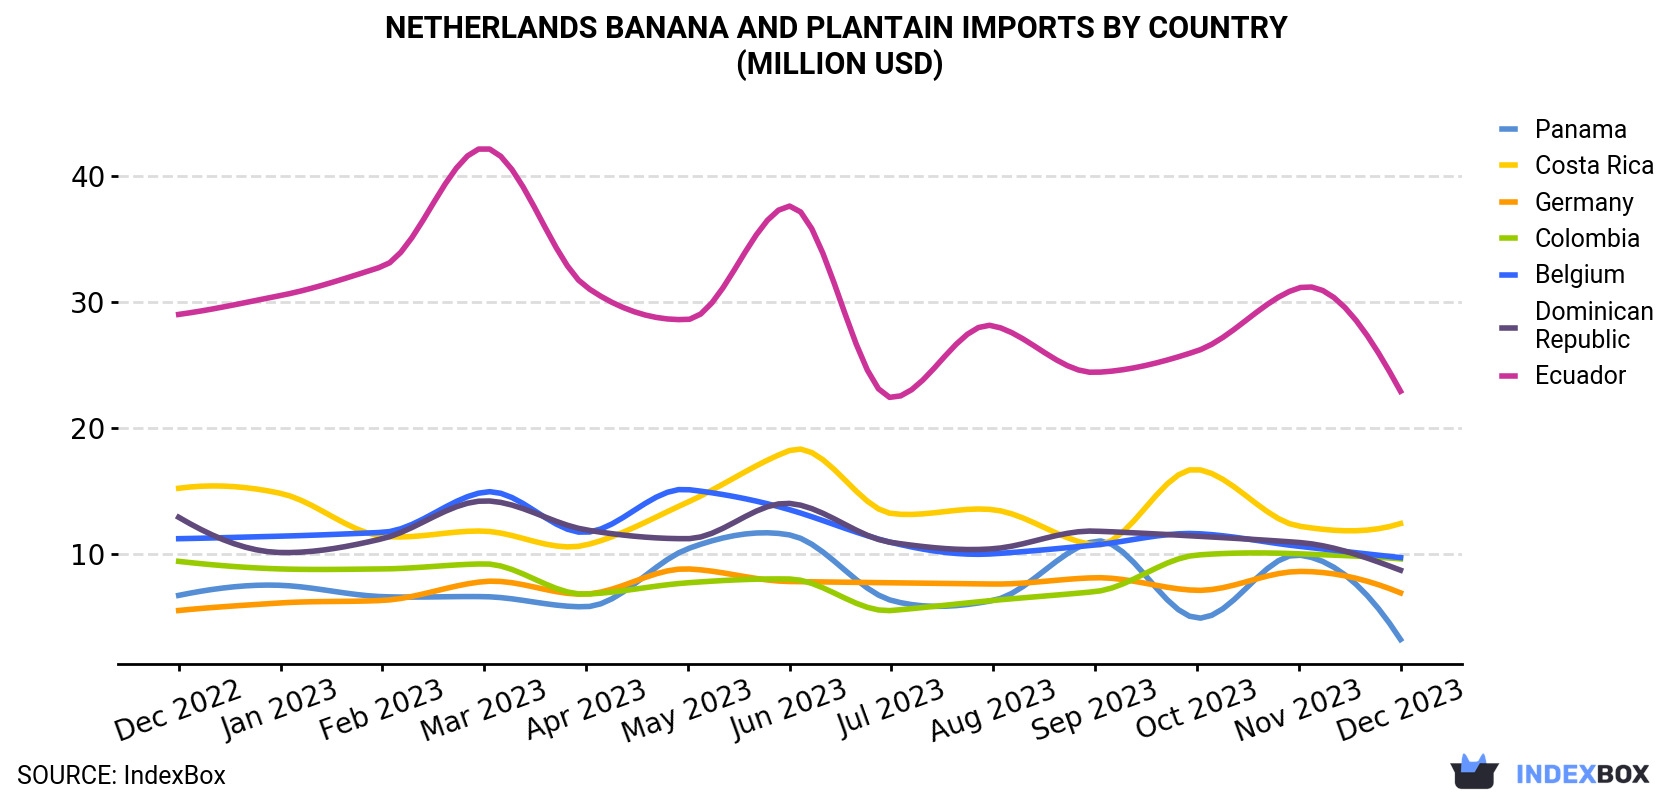 Netherlands Banana and Plantain Imports By Country (Million USD)